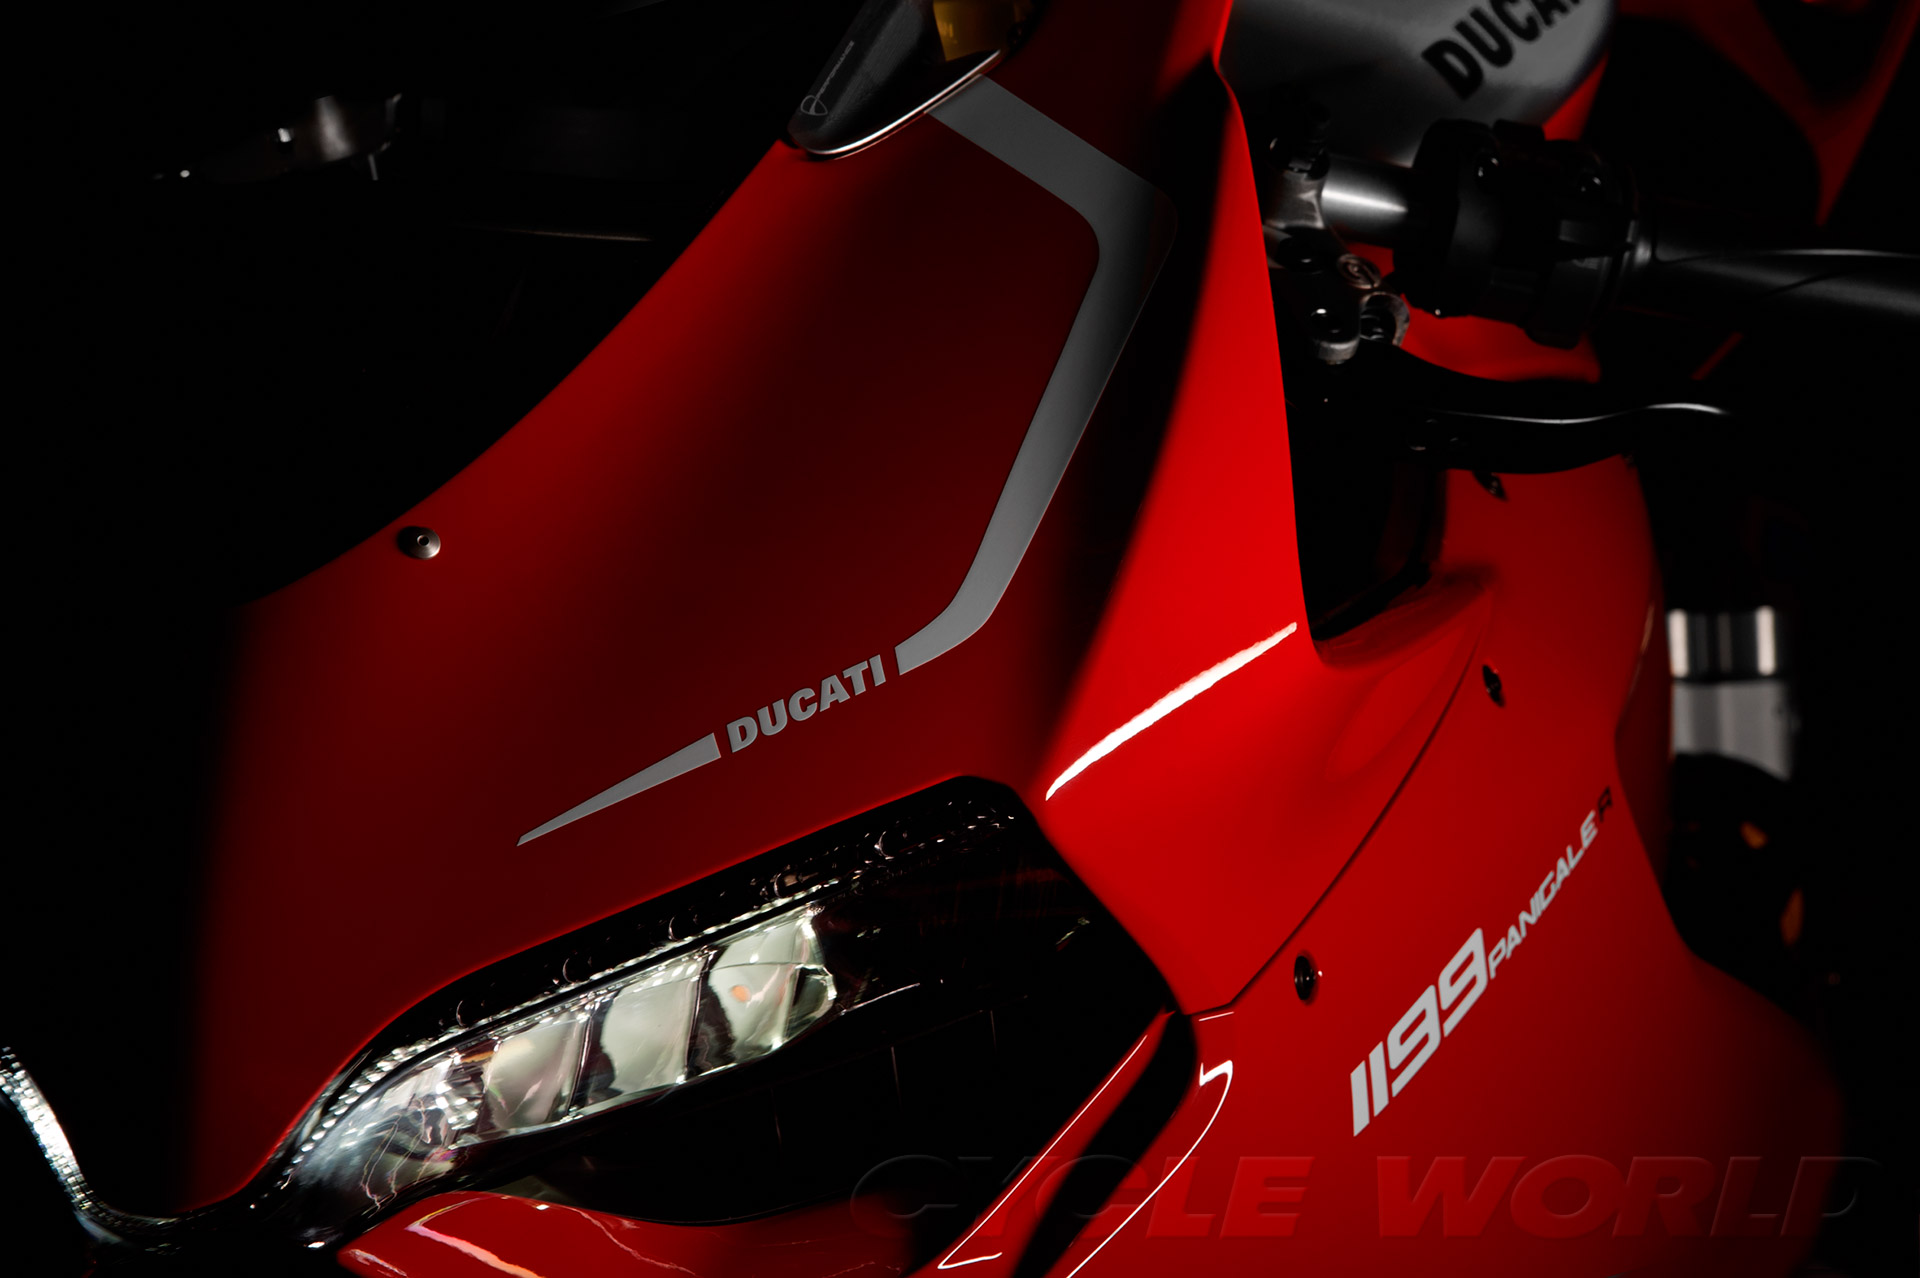 Ducati Panigale Front 24927 Hd Wallpapers in Bikes   Imagescicom